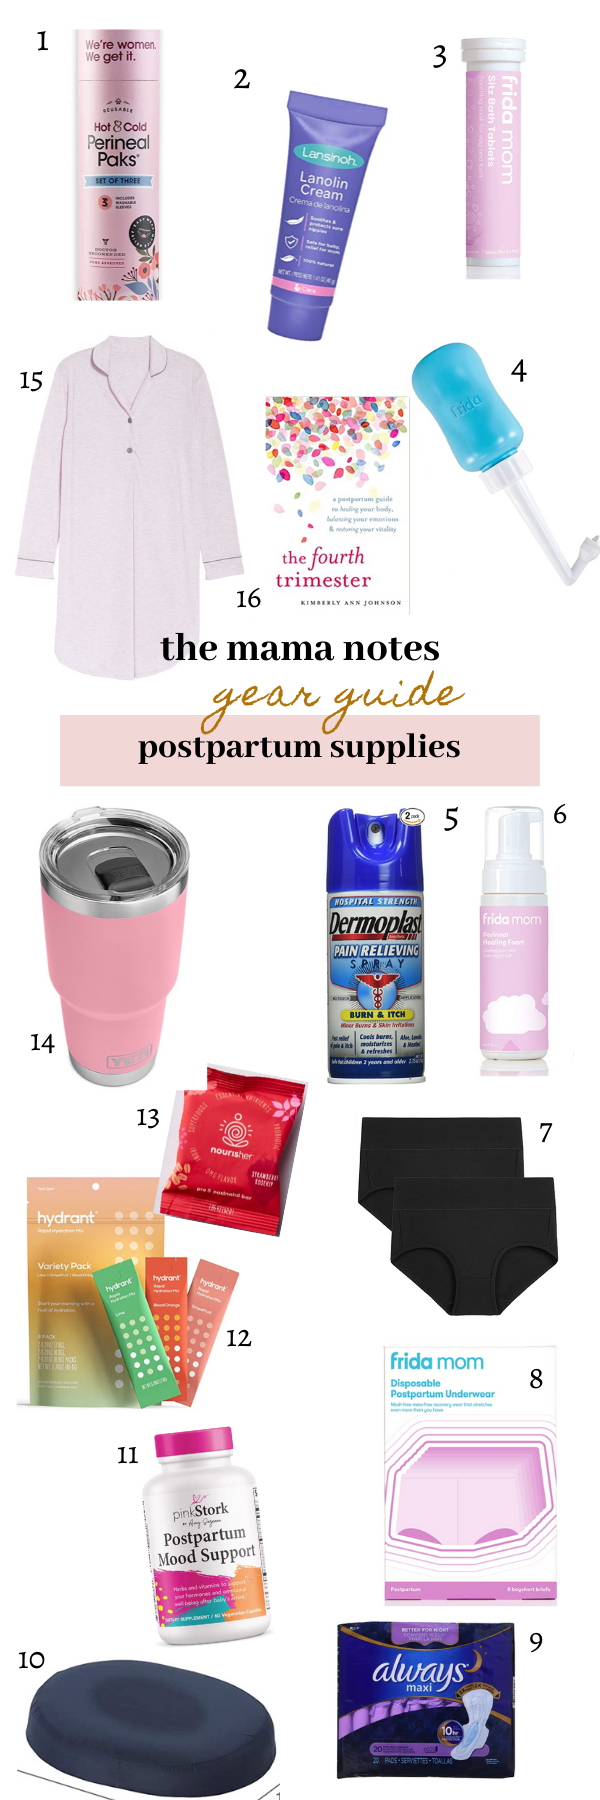 Gear Guide: Everything You Need To Survive Postpartum - The Mama Notes